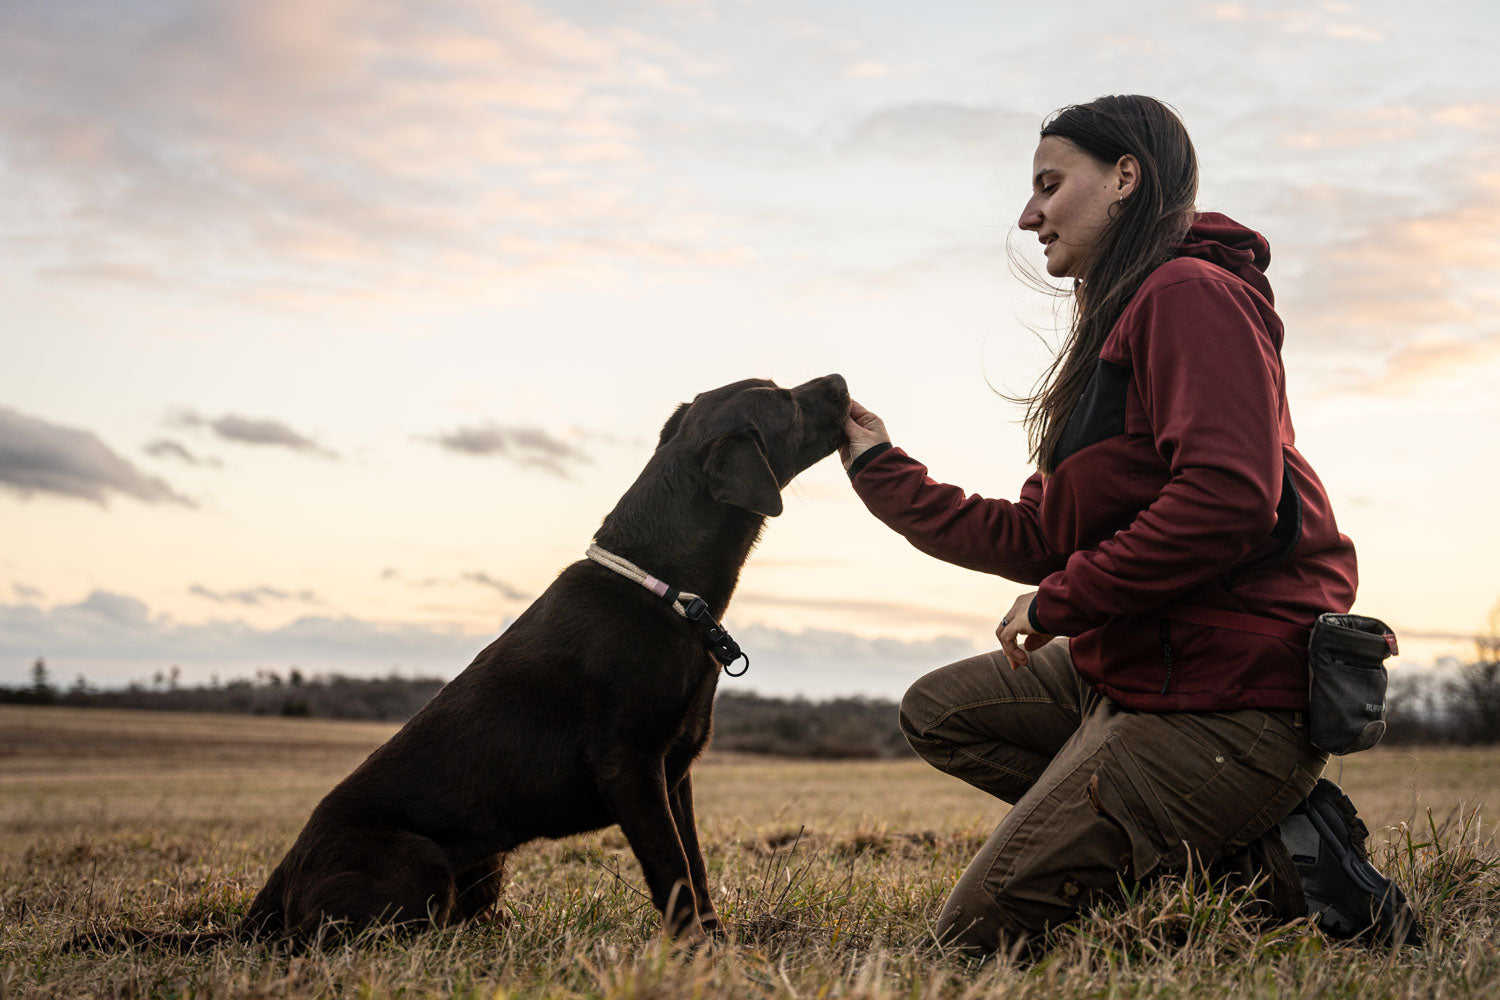 With double recall, as the name suggests, your dog has two signals to be called back. The first command is a reorientation signal or anchor signal and the second is the recall signal. This picture shows a dog owner praising his dog.